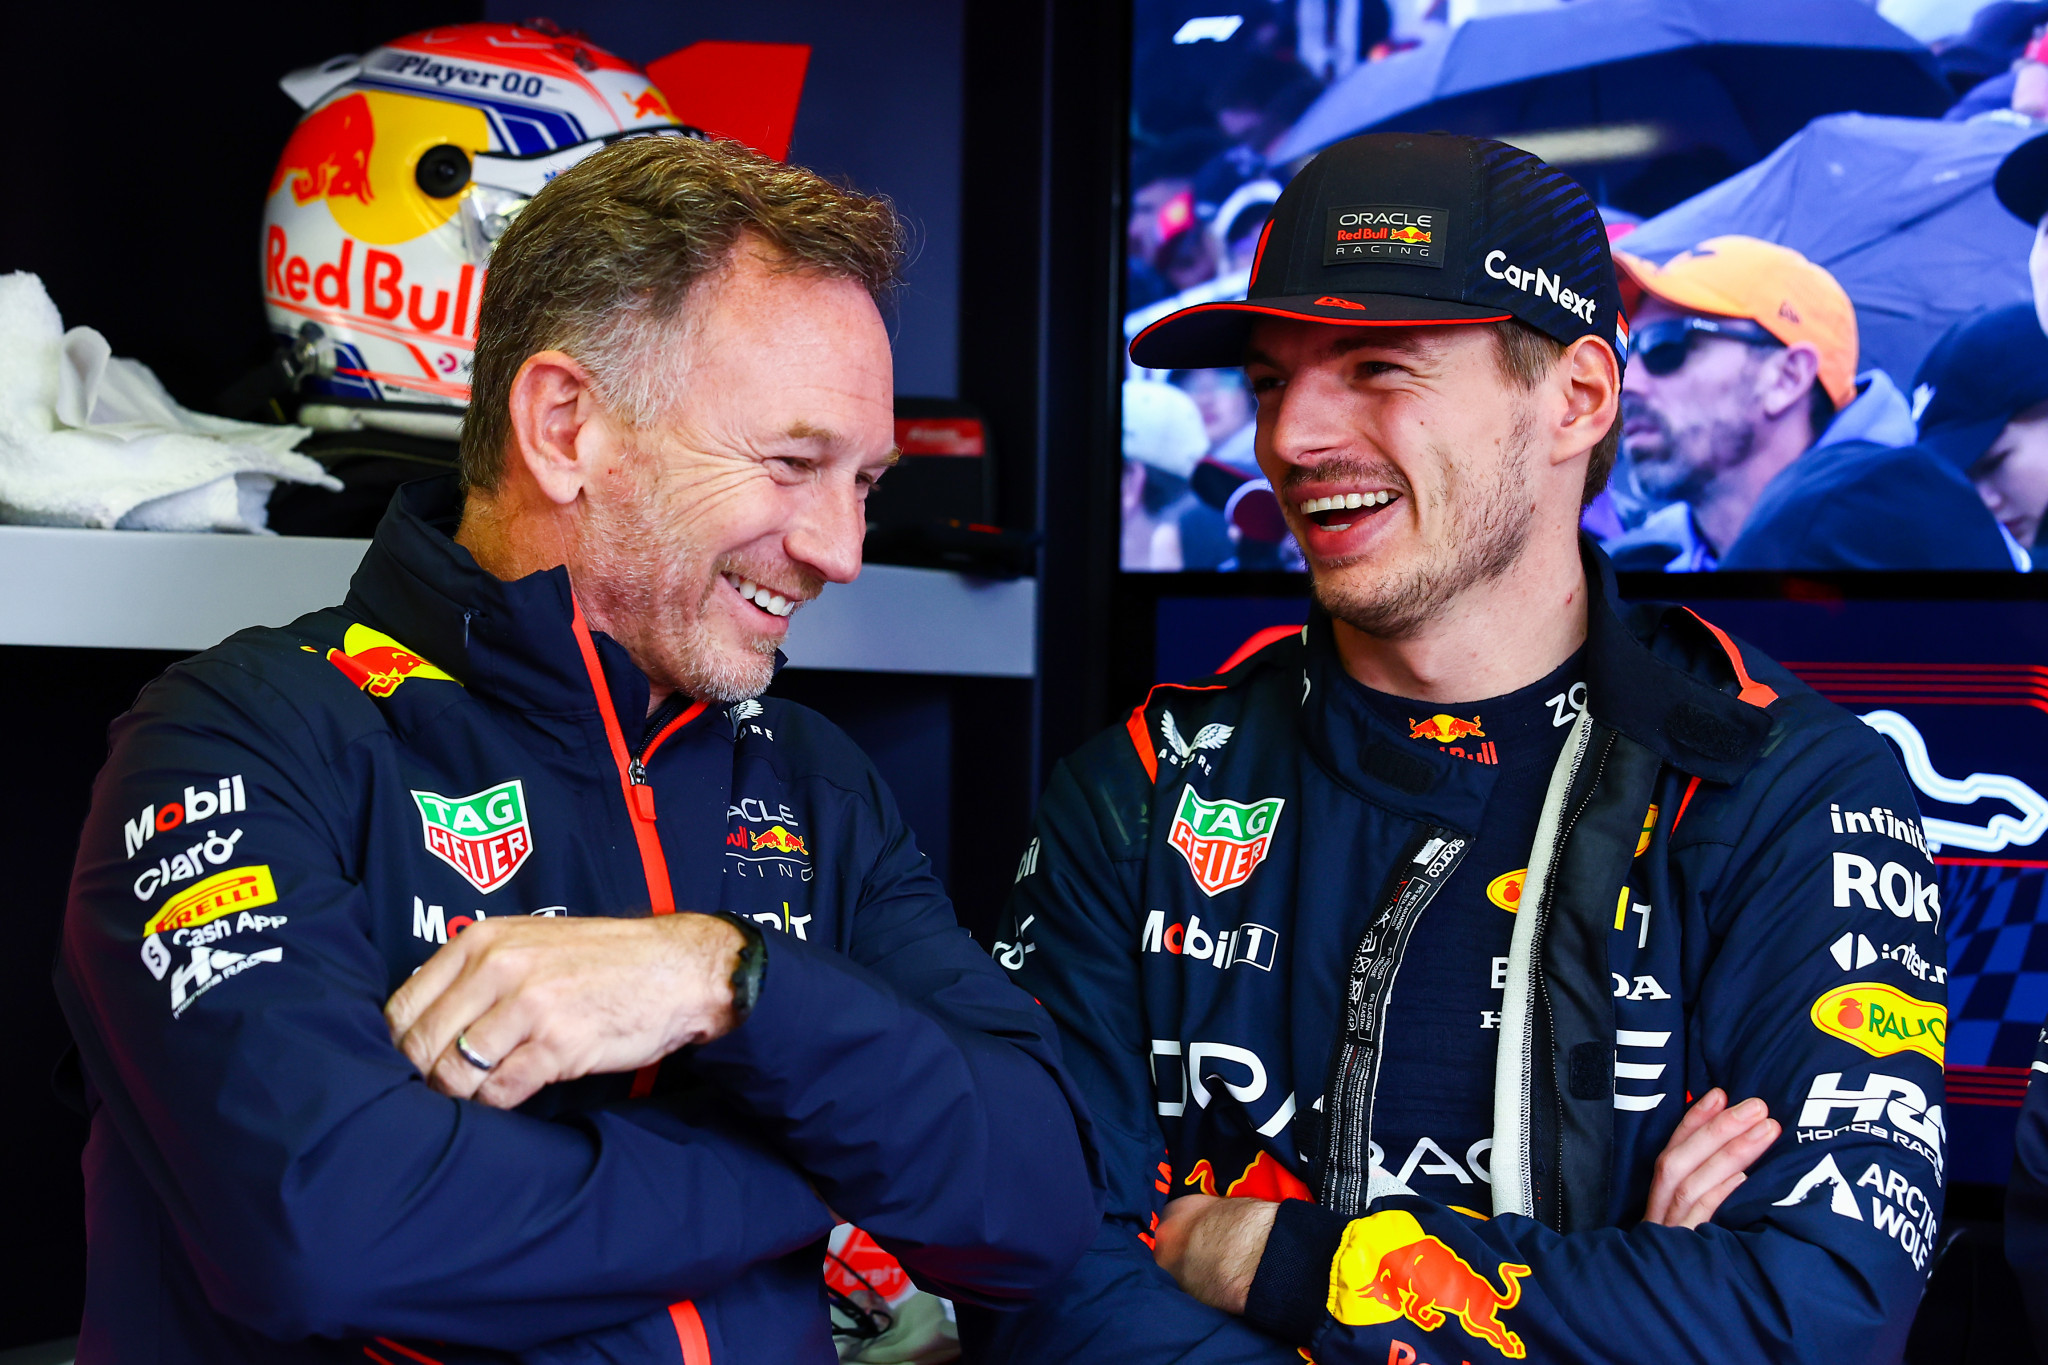 Both Christian Horner, left, and Max Verstappen, right, have criticised the sprint format while their colleague Sergio Pérez has shown his support ©Getty Images